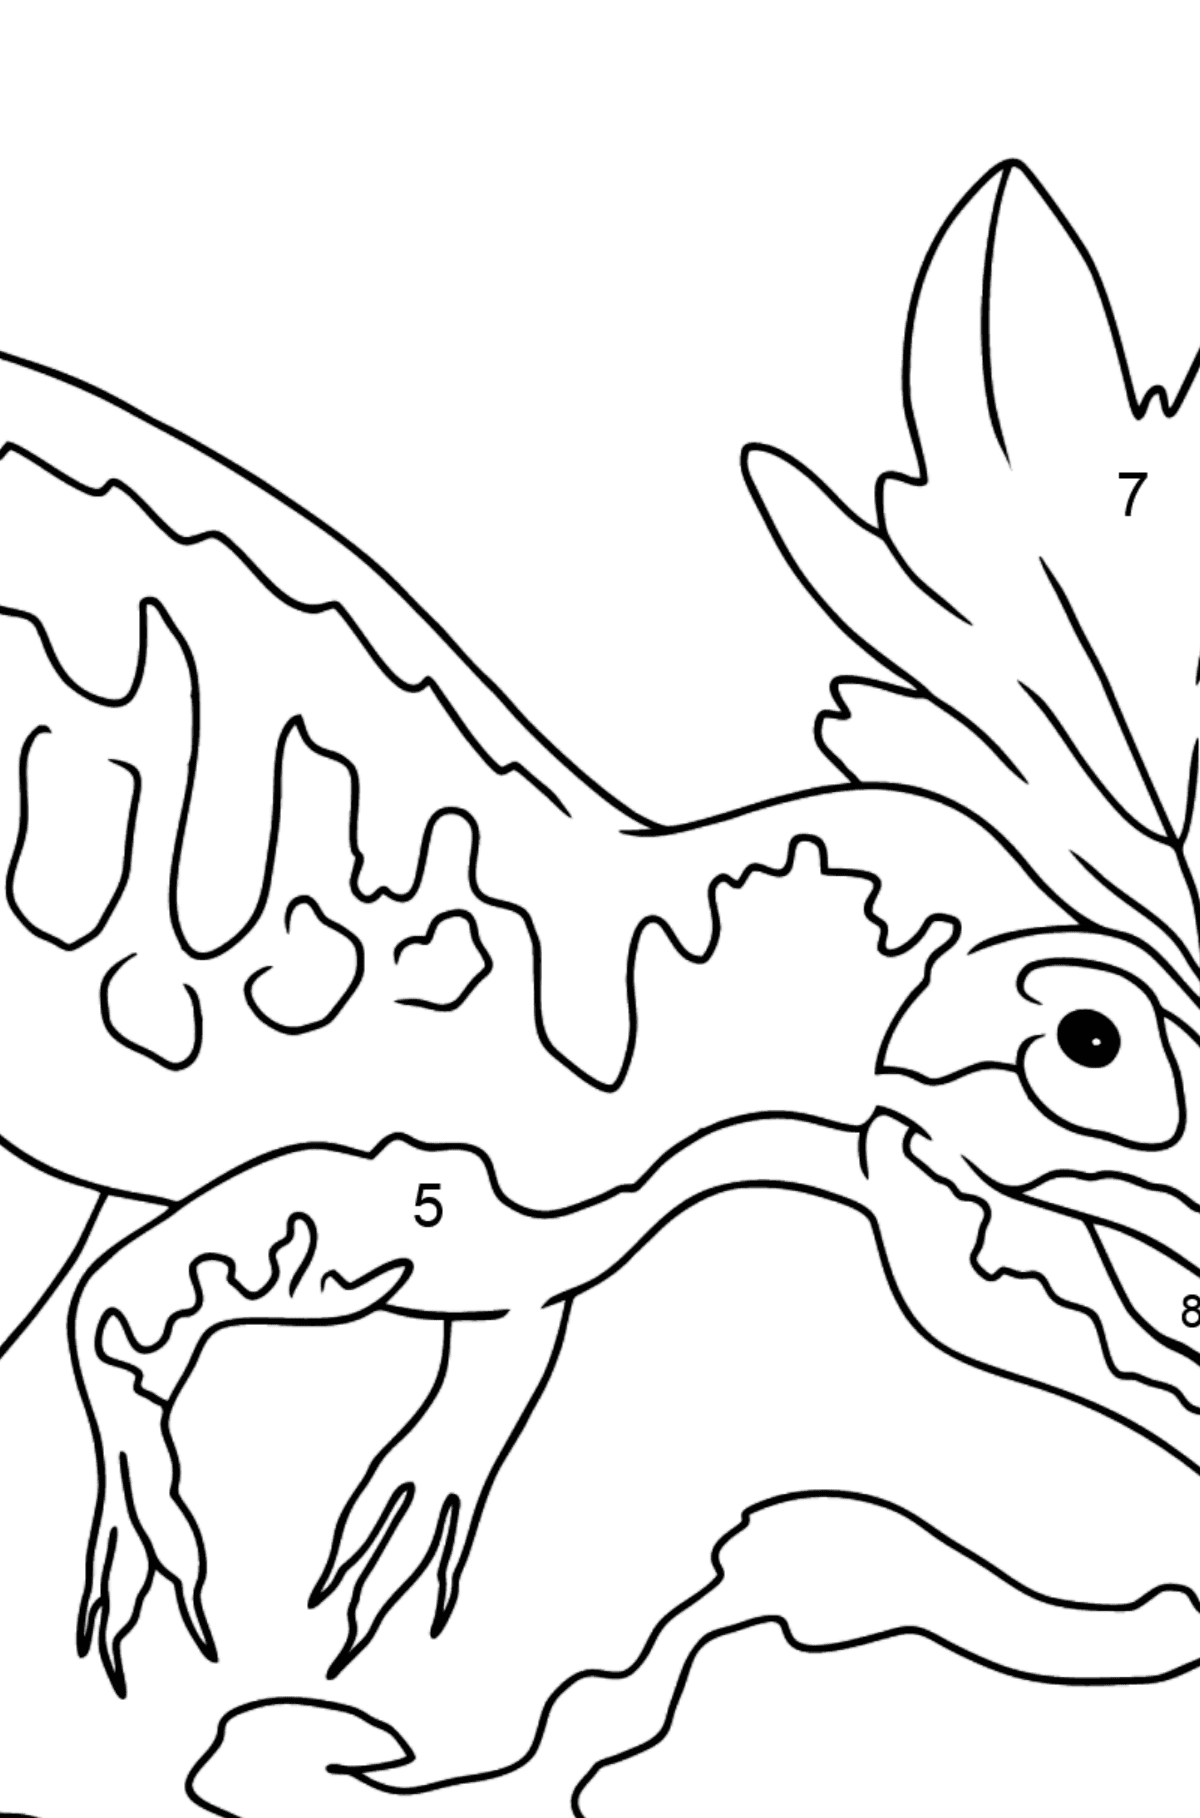 Allosaurus Coloring Page - Coloring by Numbers for Kids